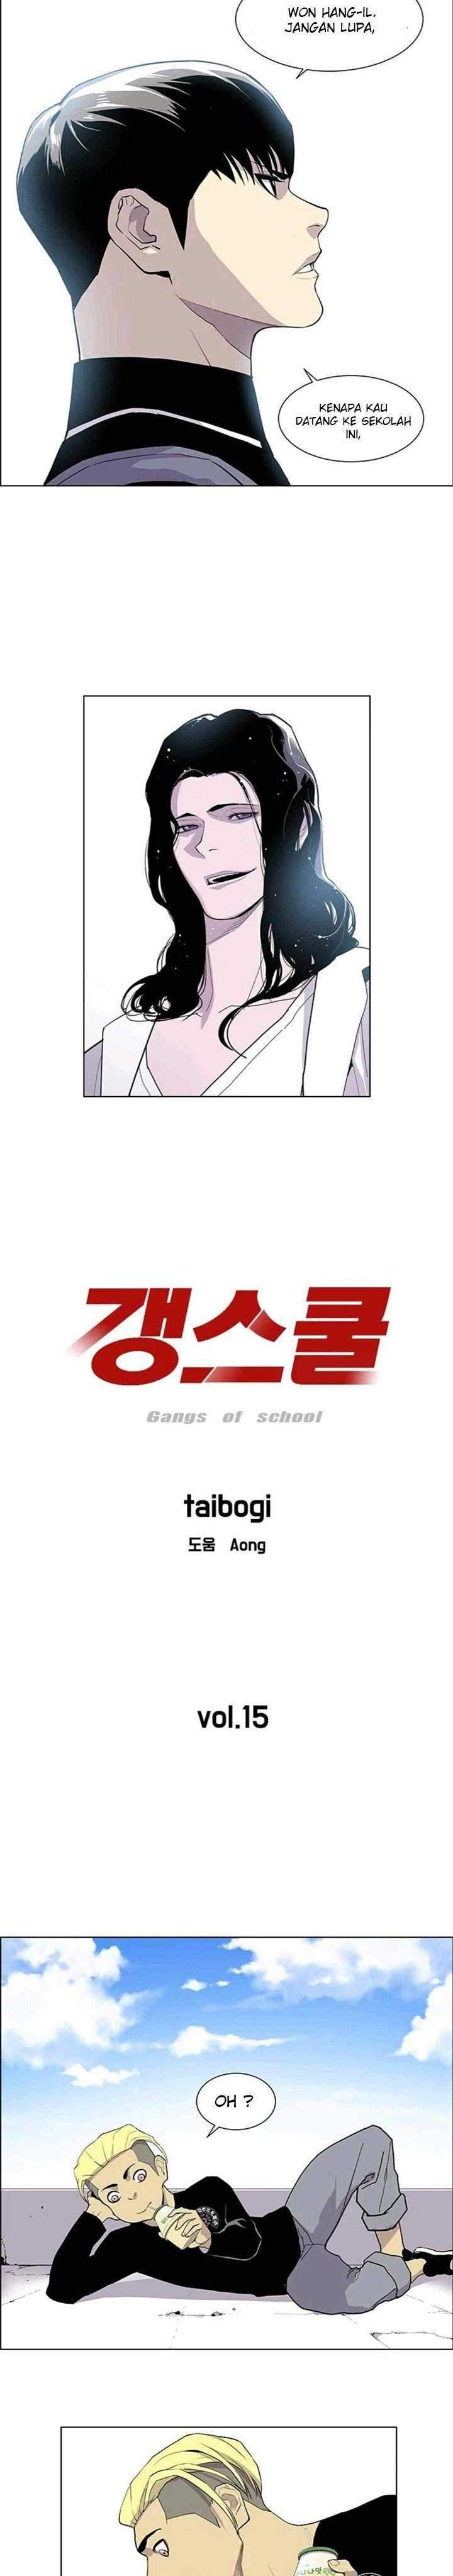 Gang Of School Chapter 15